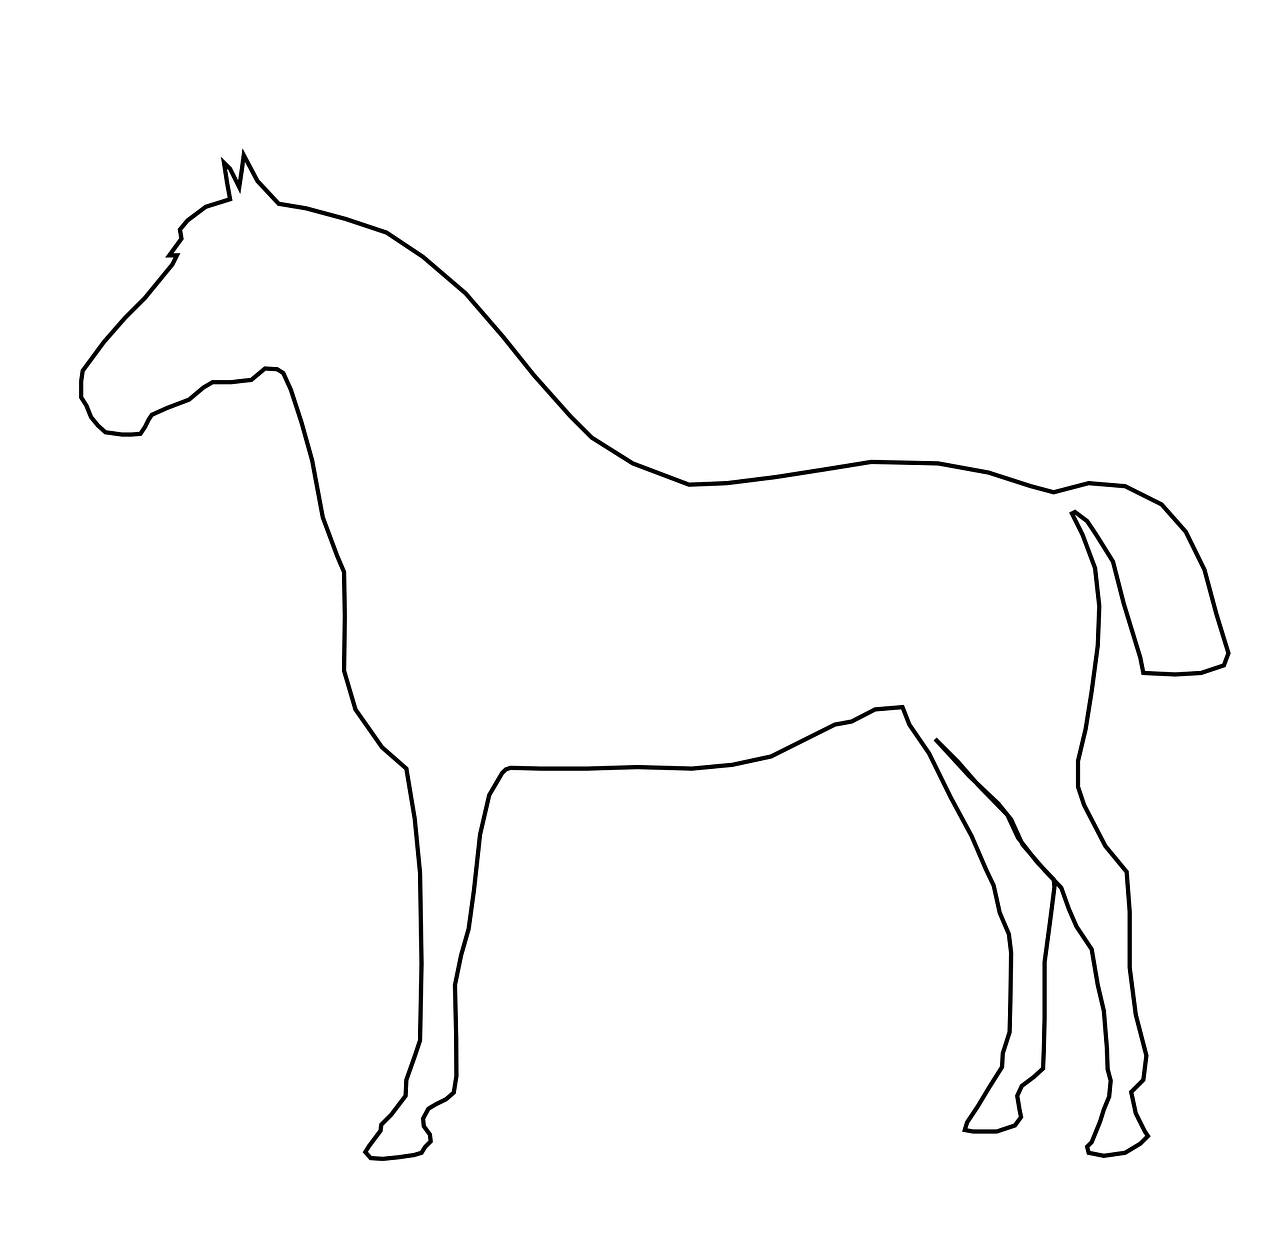 Racehorse silhouette coloring page